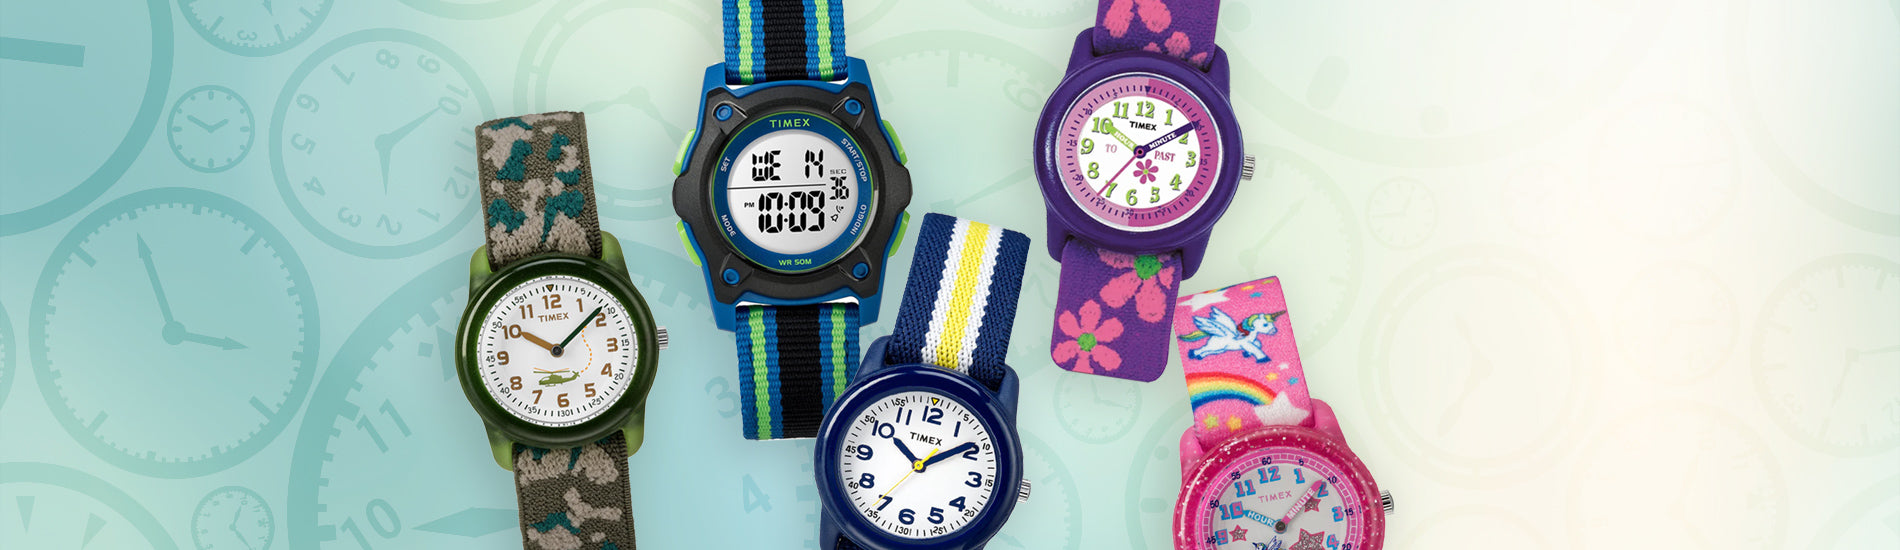 All Kid's Watches